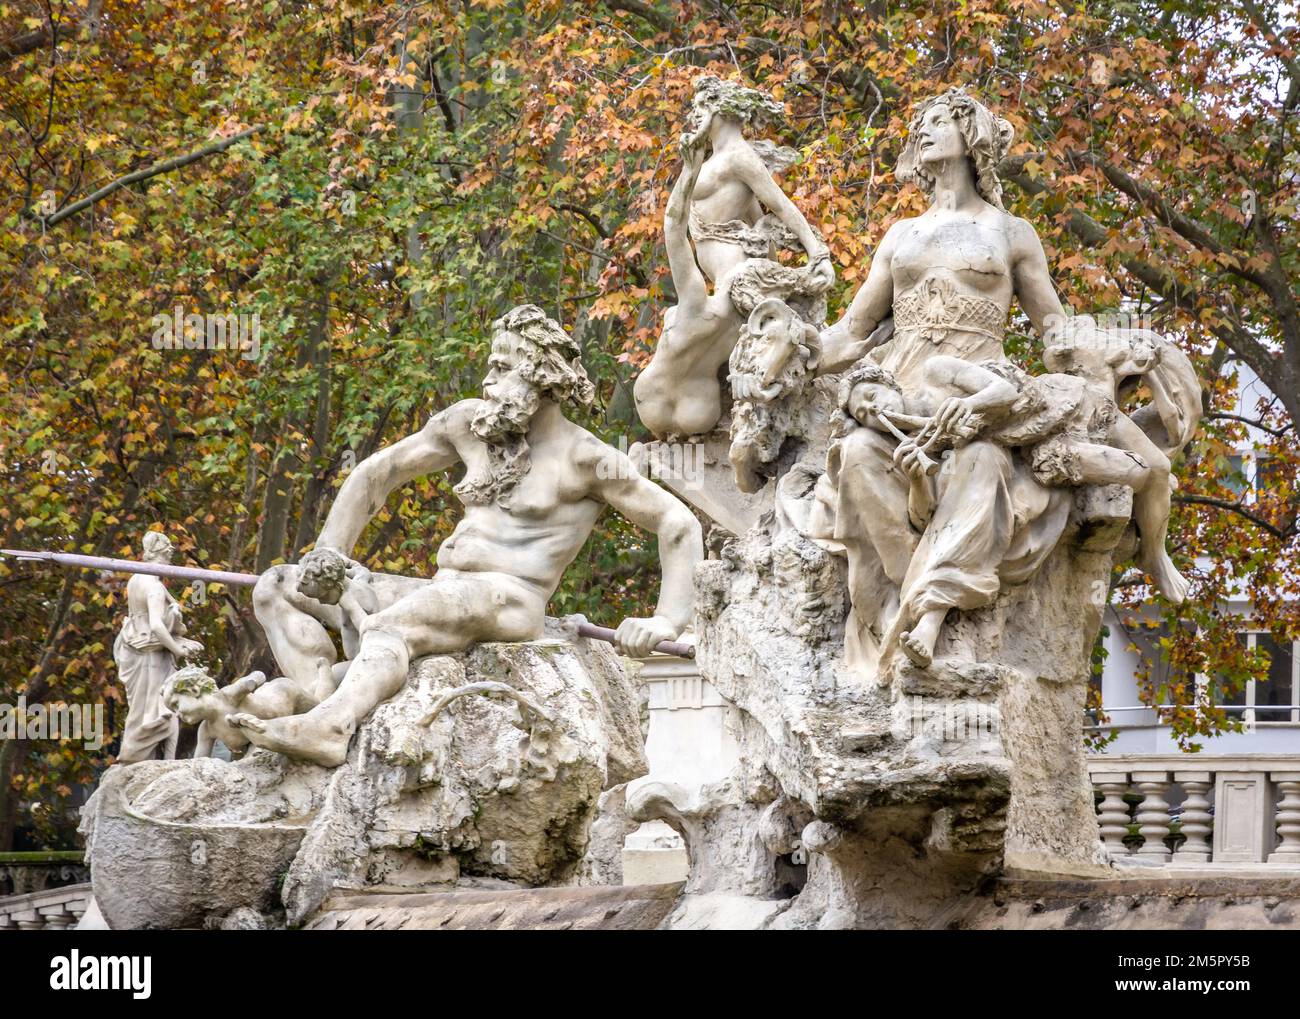 The monumental Fountain of Twelve Months, surrounded by trees in autunno of Valentino Park on the Banks of the Po River, Turin, Piedmont - Italy Stock Photo